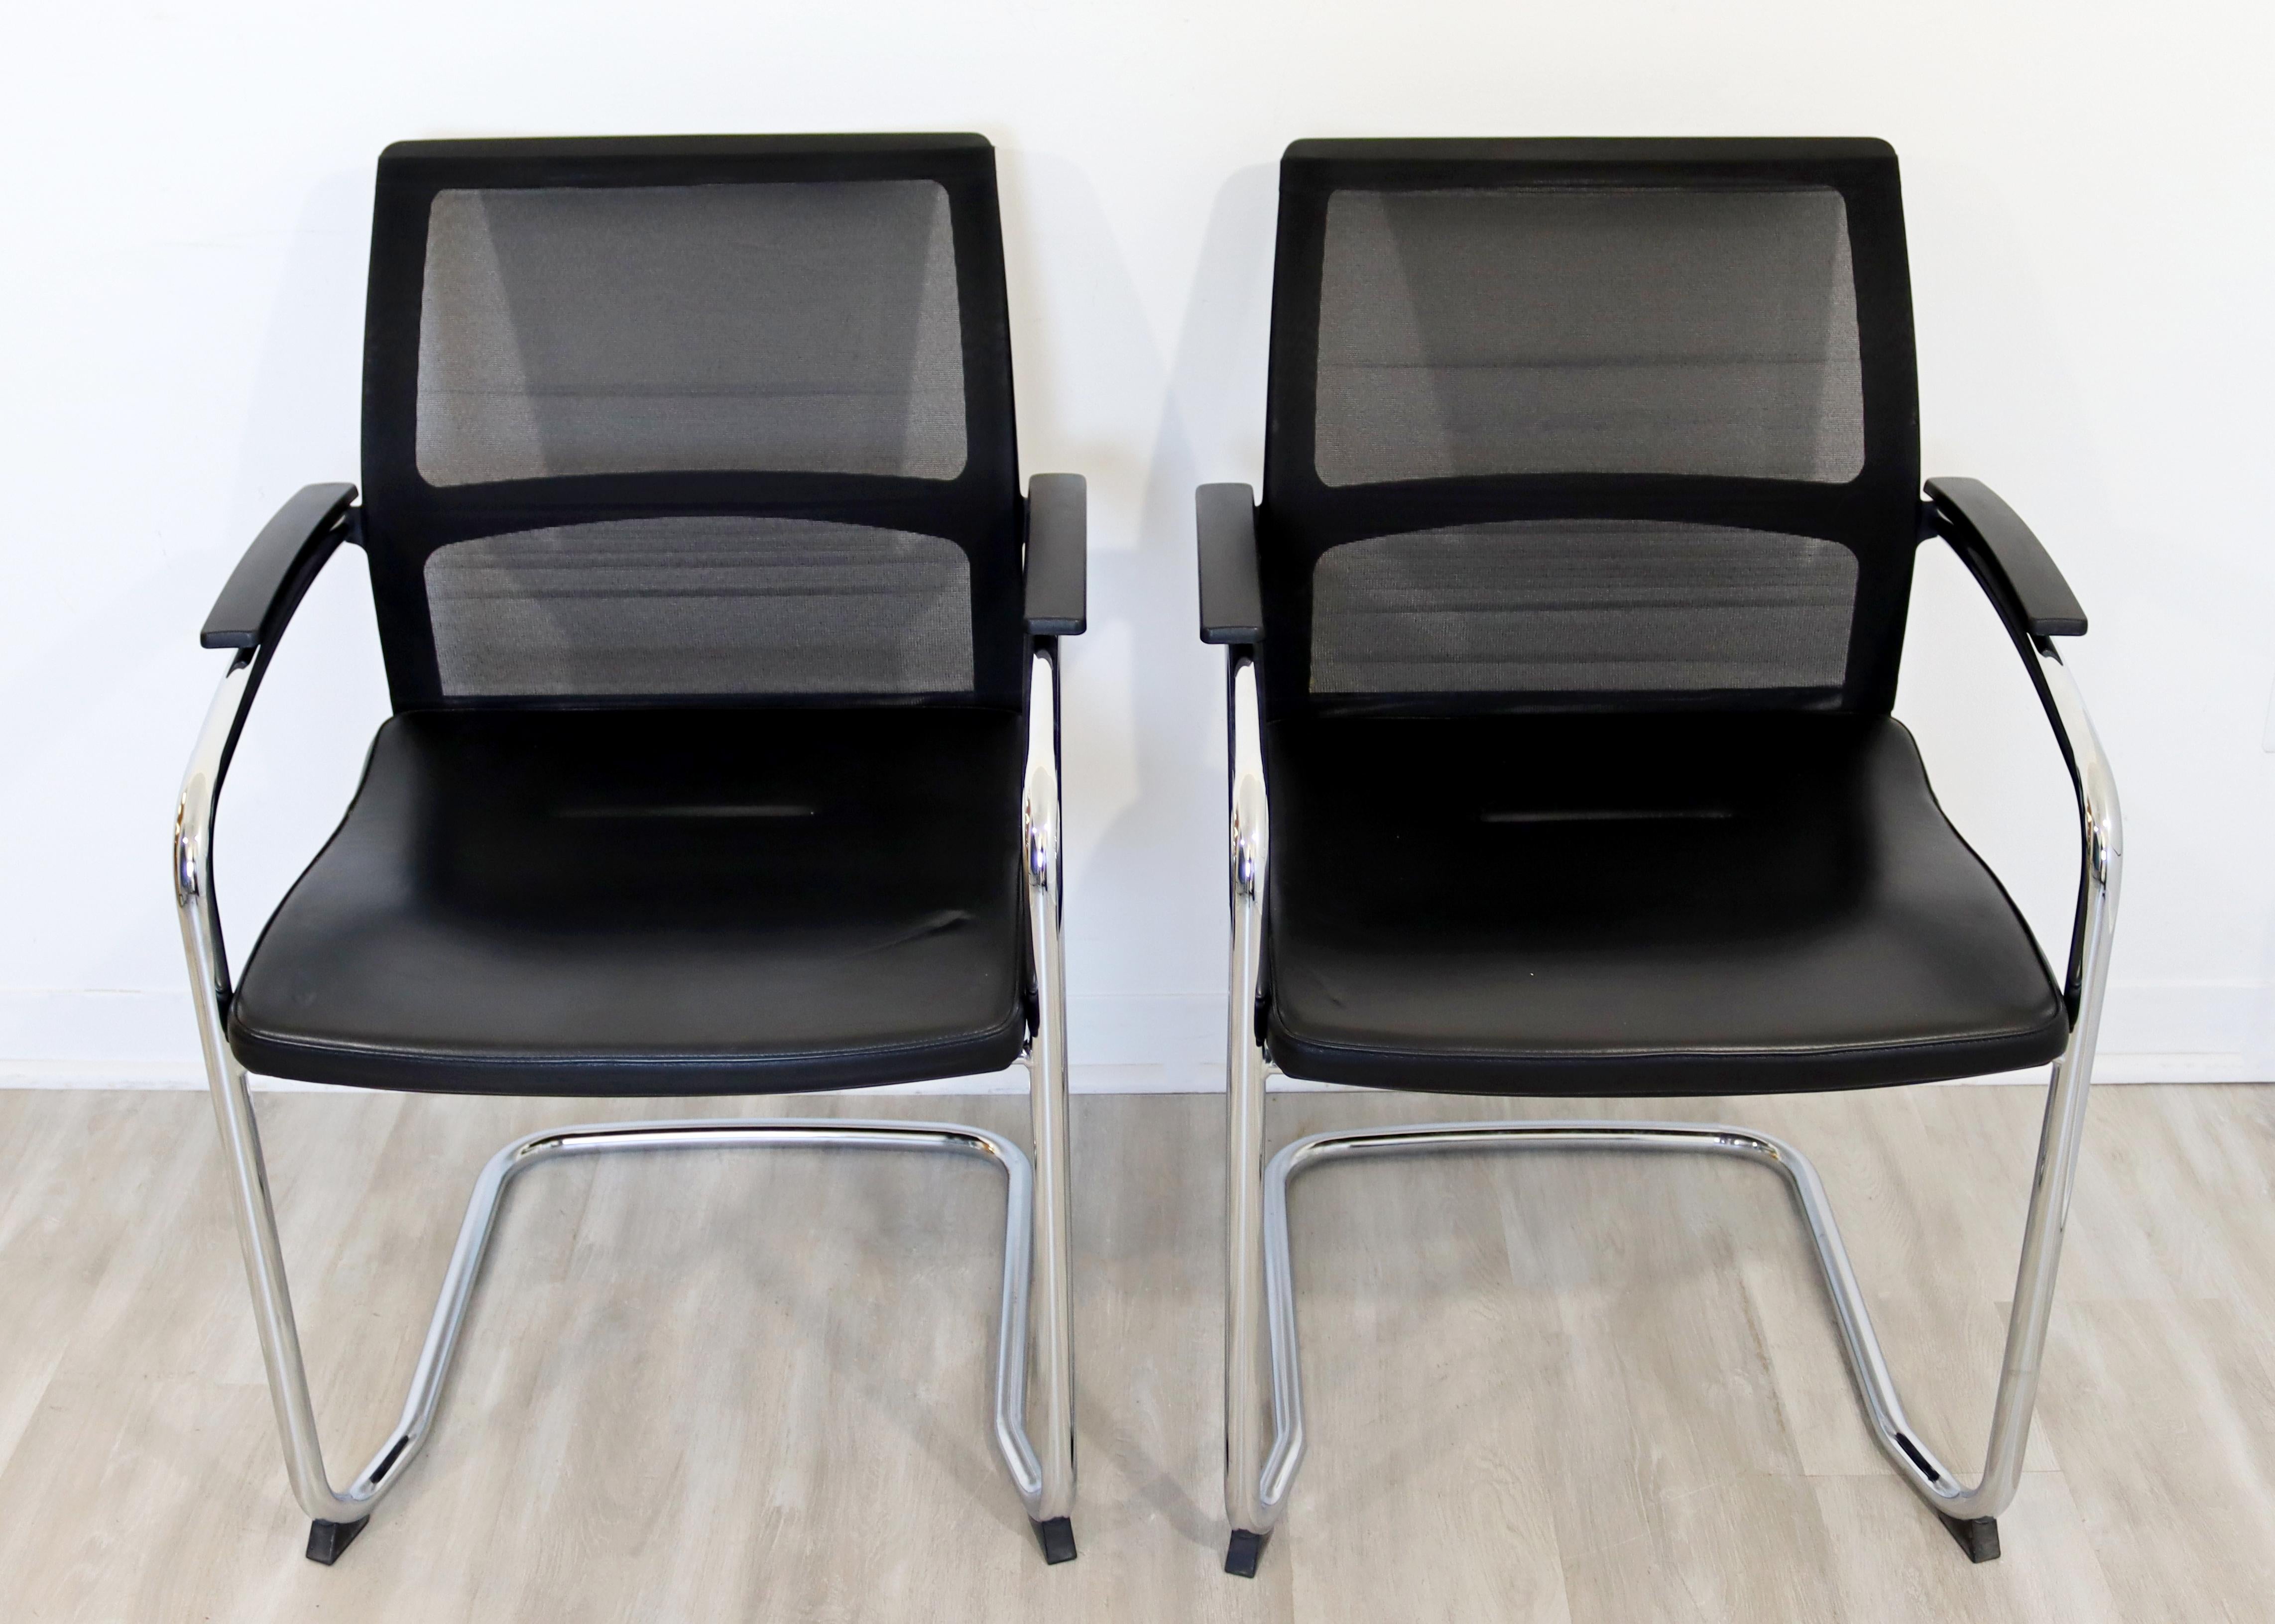 Contemporary Knoll Pair Chrome Cantilever Black Dining Conference Office Chairs 1